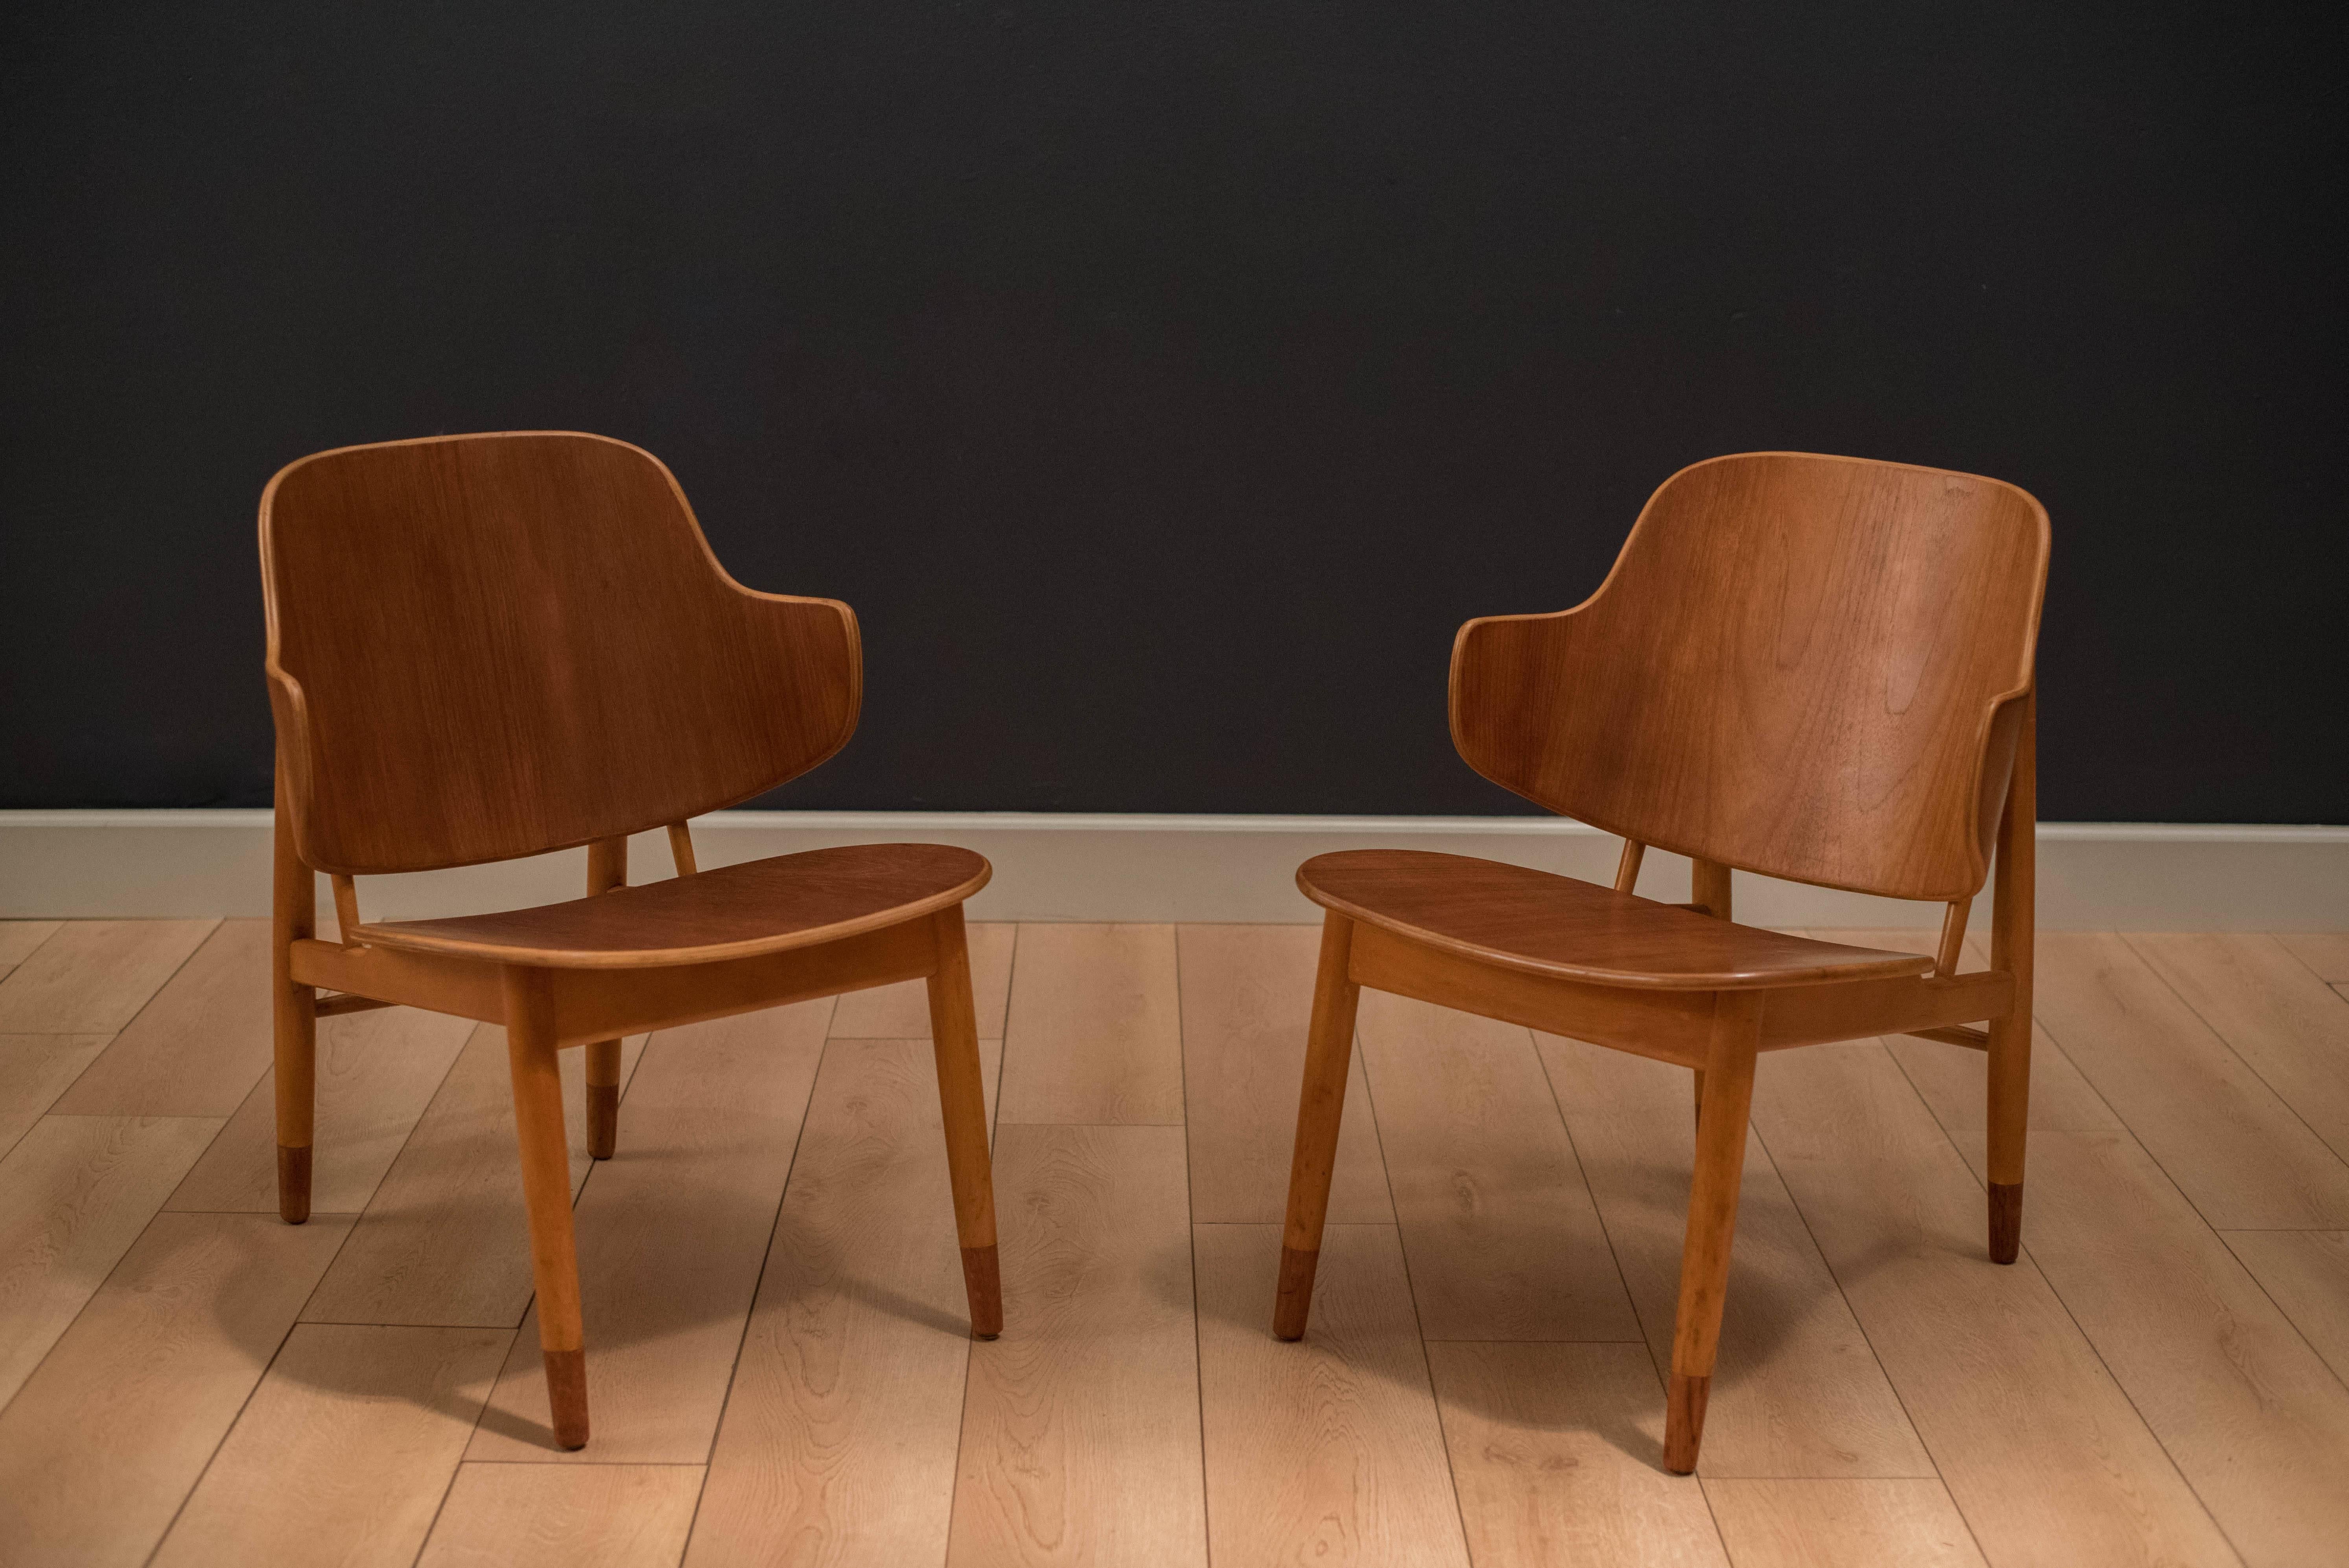 Mid-Century shell chairs designed by Ib Kofod-Larsen. This pair features a sculpted bent seat and backrest with contrasting teak and birch finishes. 

